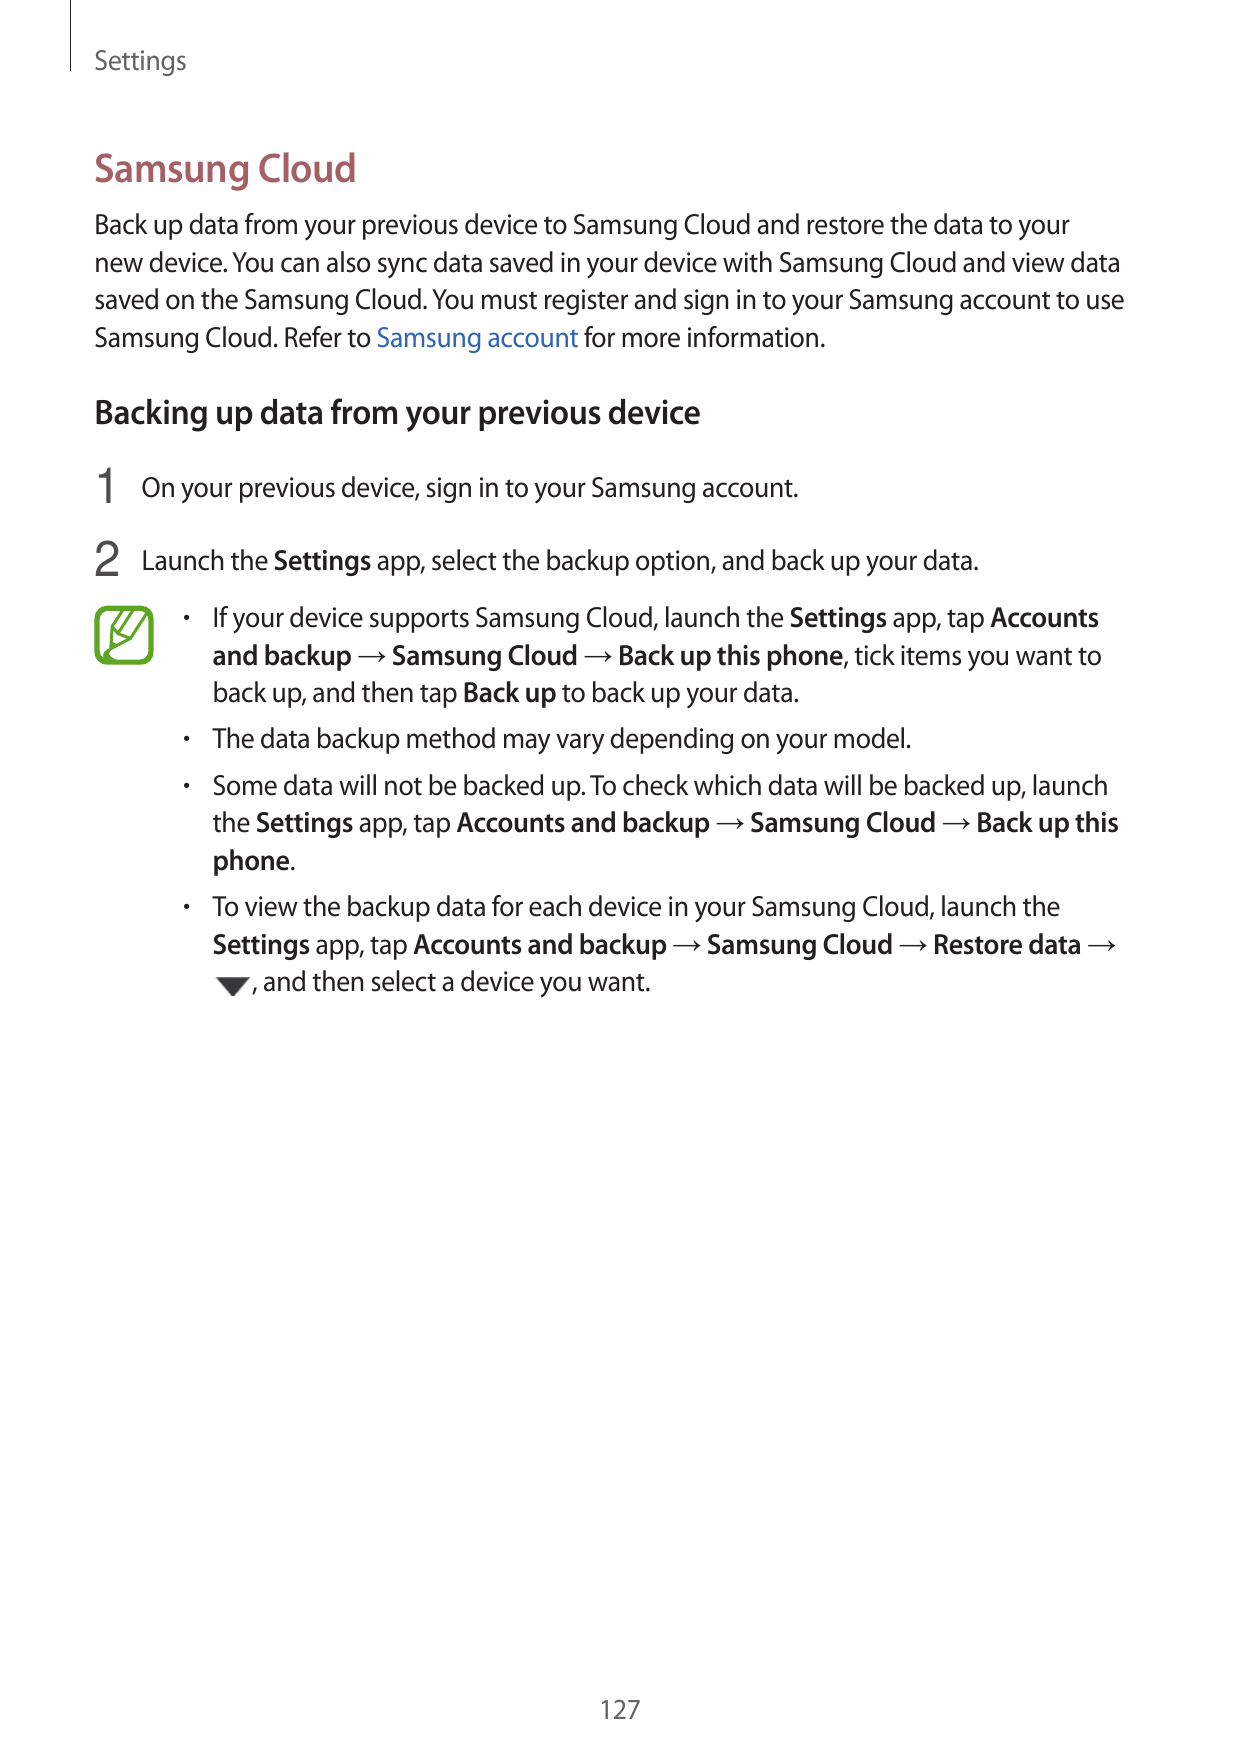 SettingsSamsung CloudBack up data from your previous device to Samsung Cloud and restore the data to yournew device. You can als